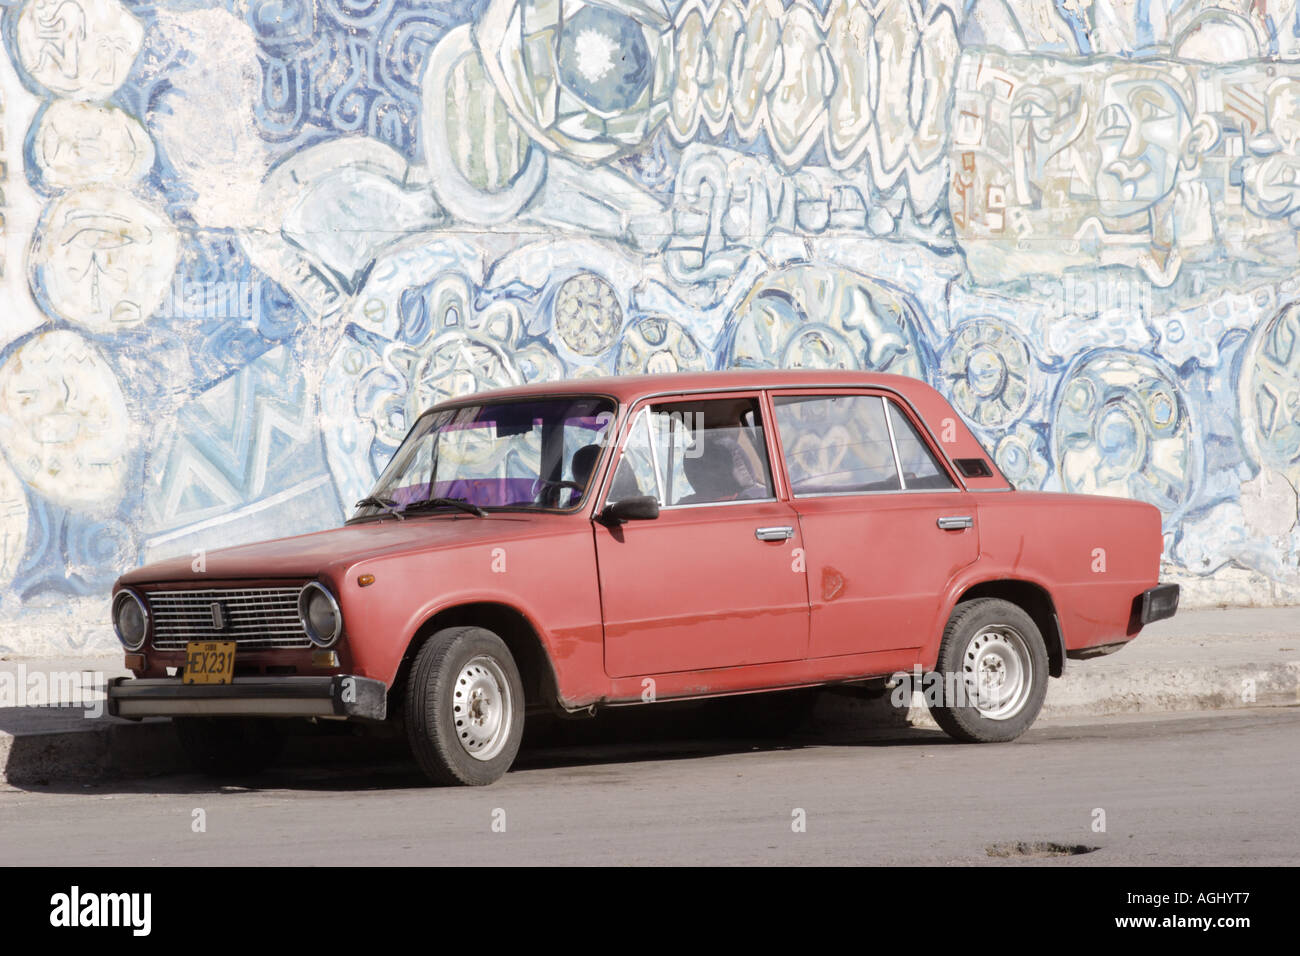 Red Lada parked by a mural in Havana, Cuba Stock Photo